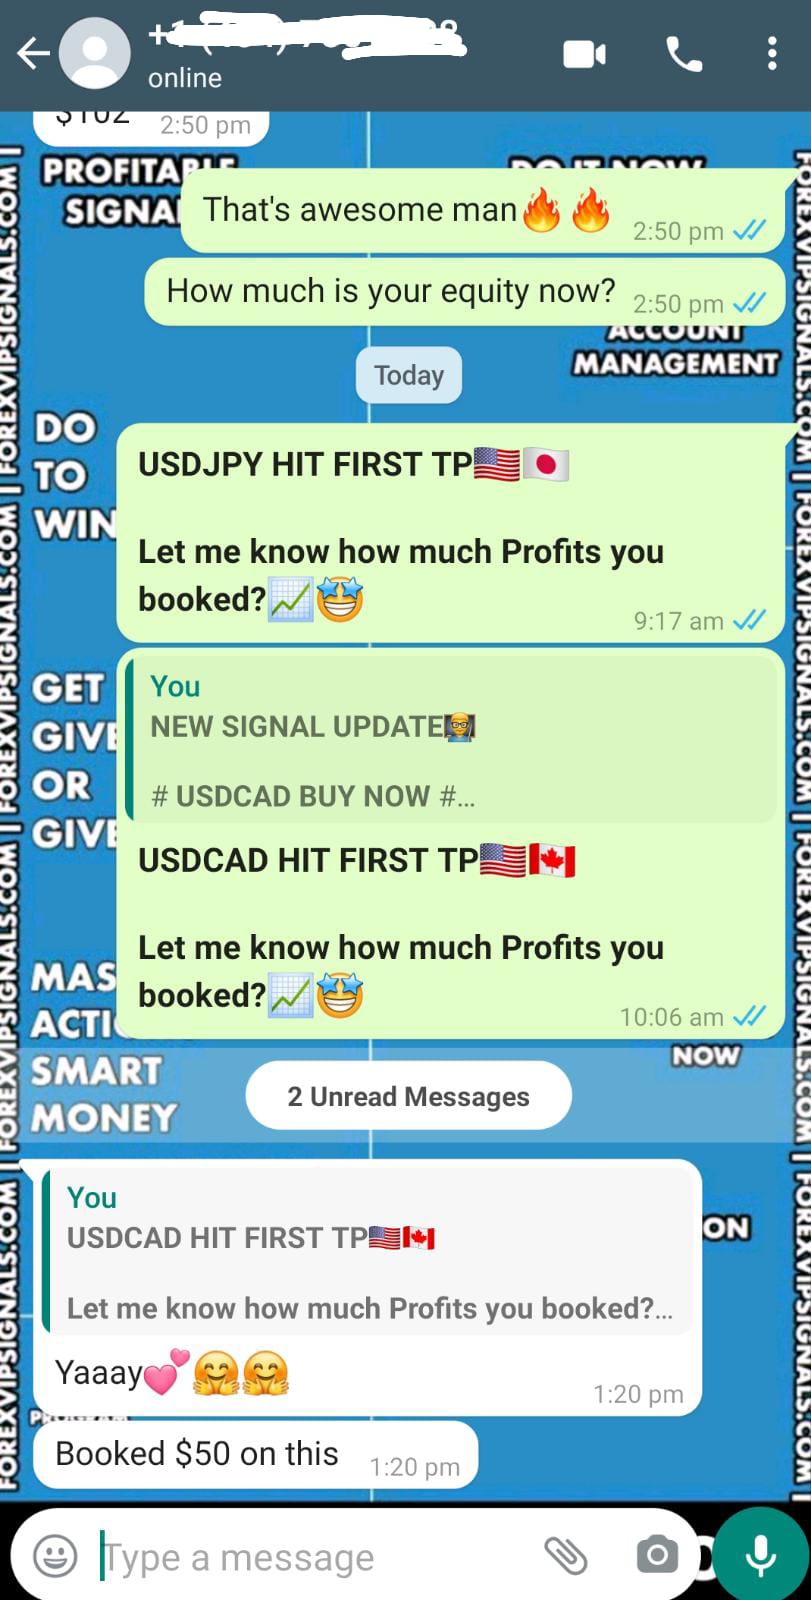 free forex trading signals daily by forex vip signals